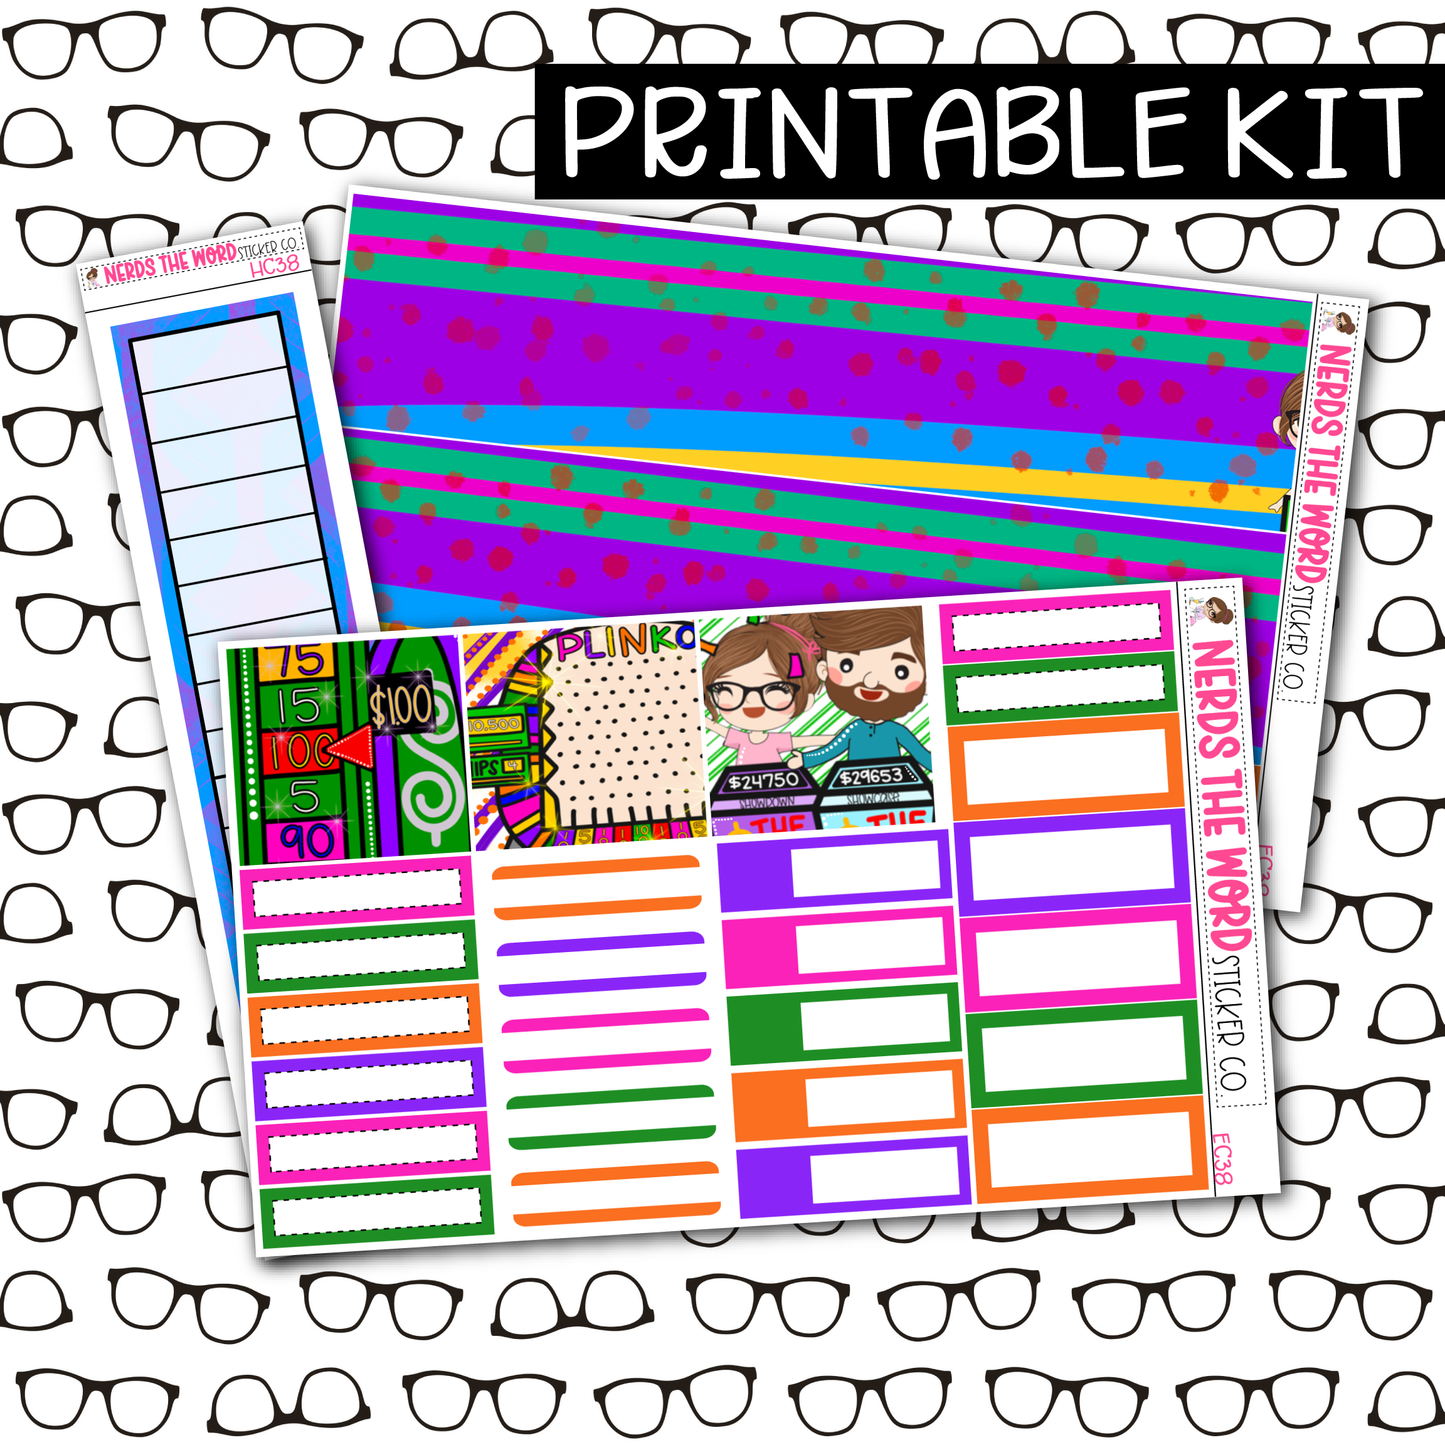 PRINTABLE  One Dollar Monthly Kit - Choose your Size